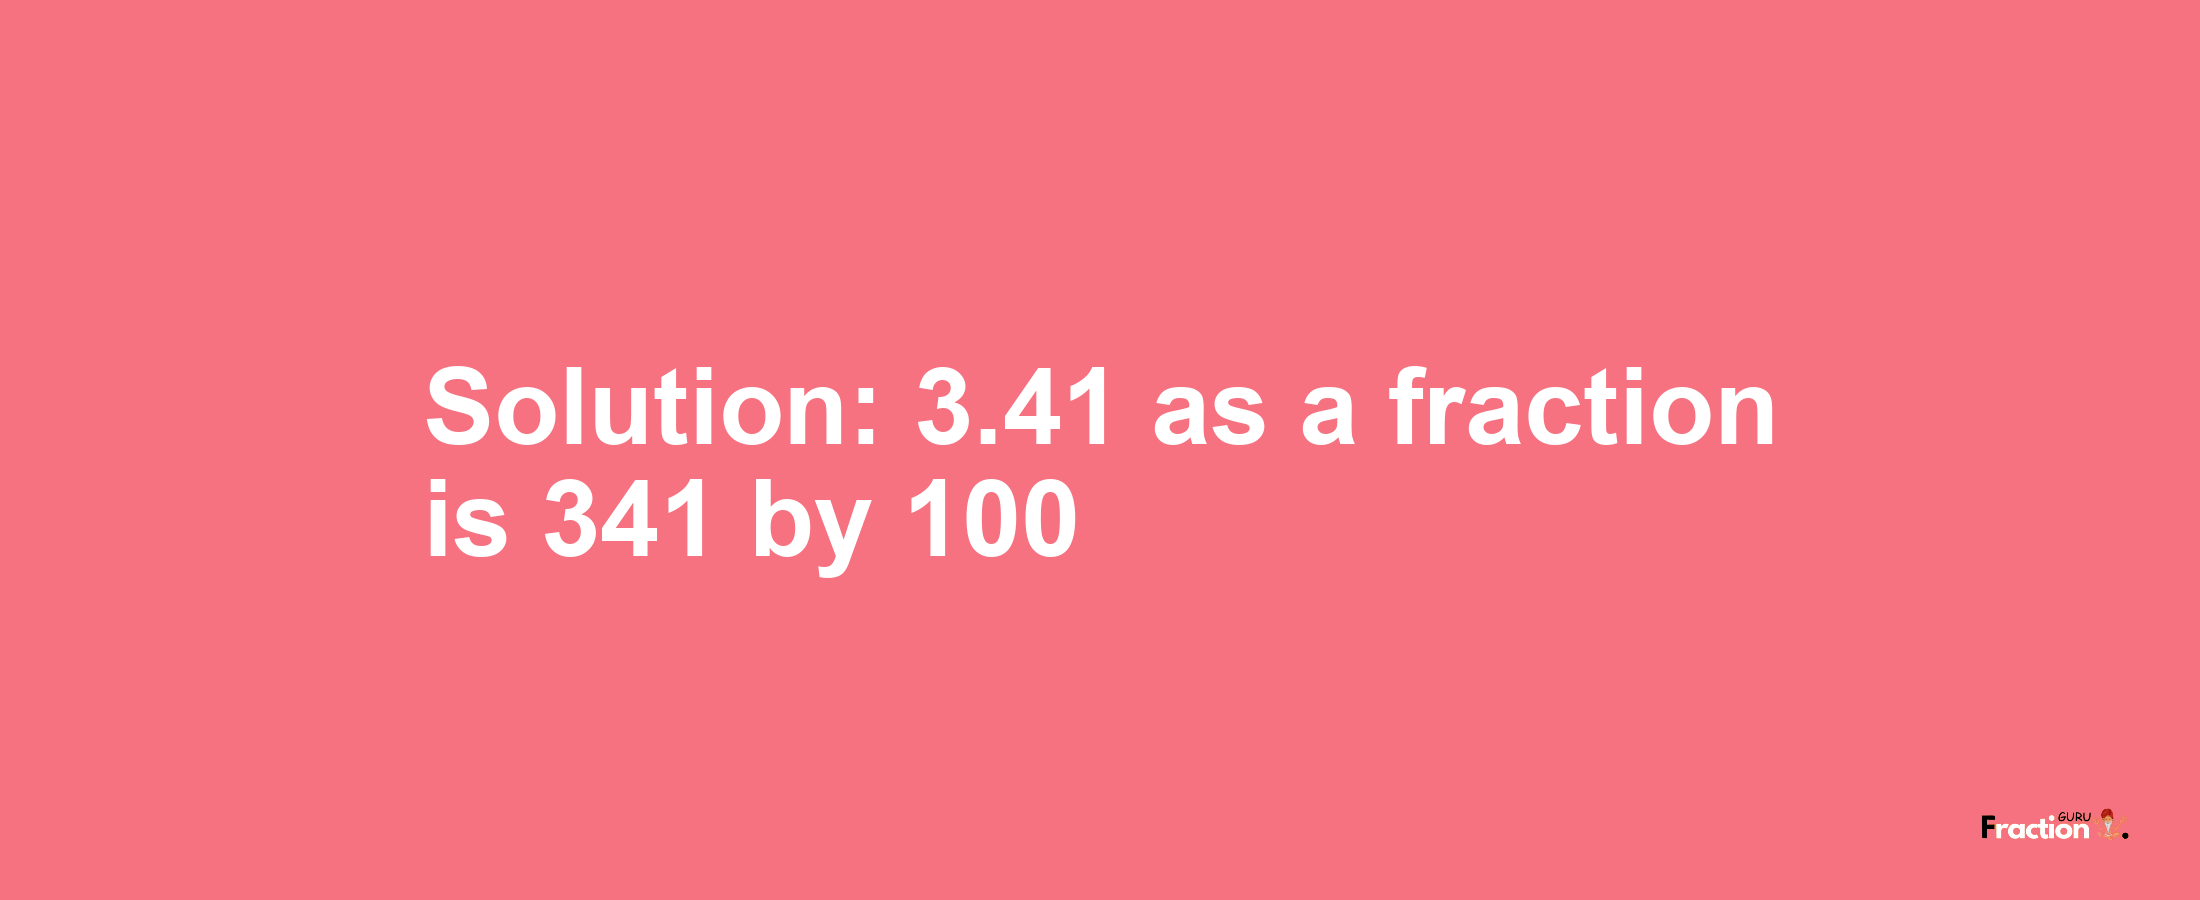 Solution:3.41 as a fraction is 341/100